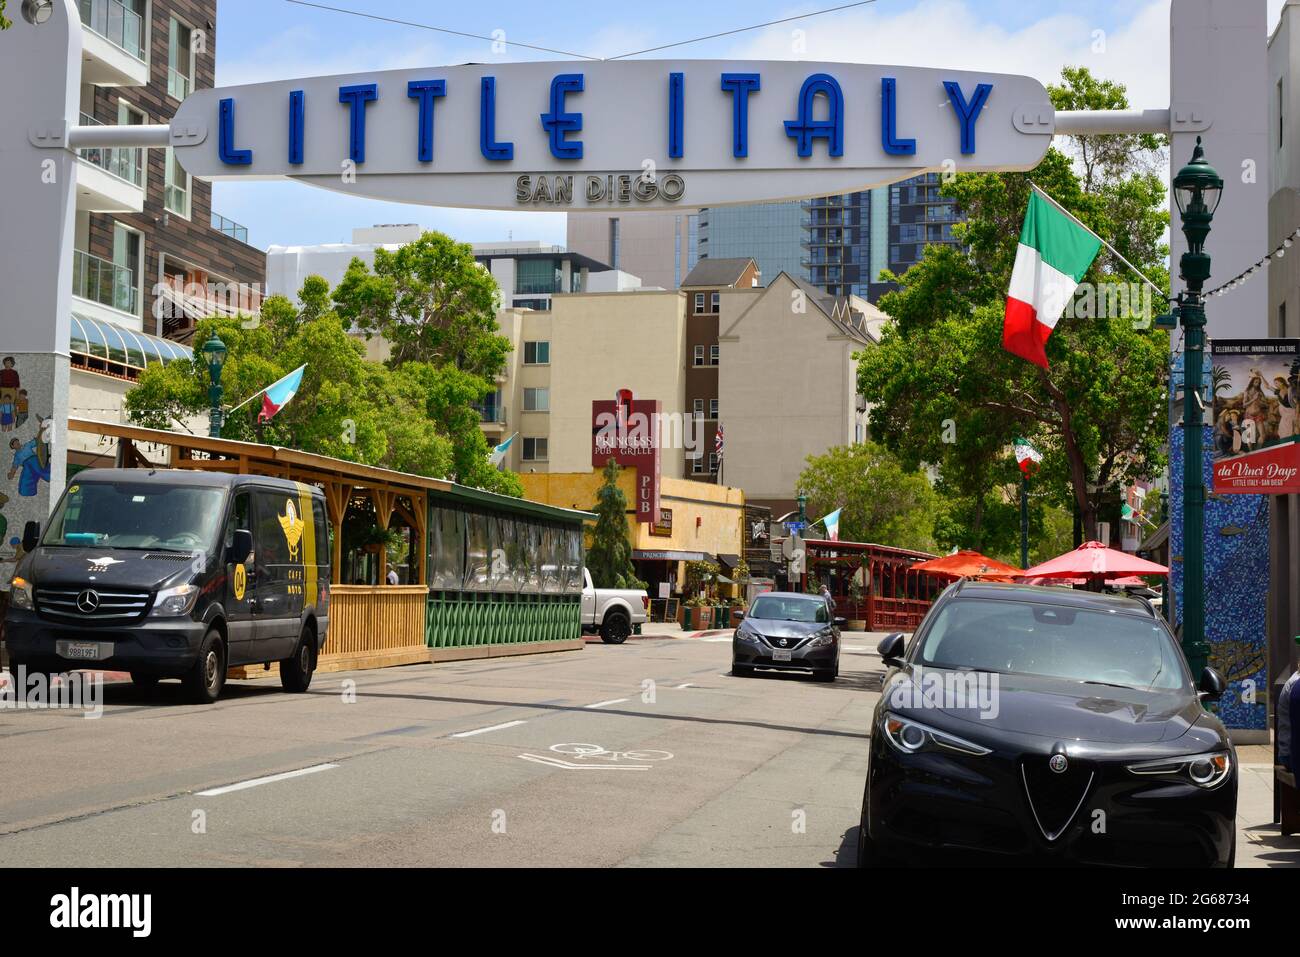 A late model Alpha Roma Giulia car parked under the overhead sign for Little Italy neighborhood near the waterfront in San Diego, CA, USA Stock Photo